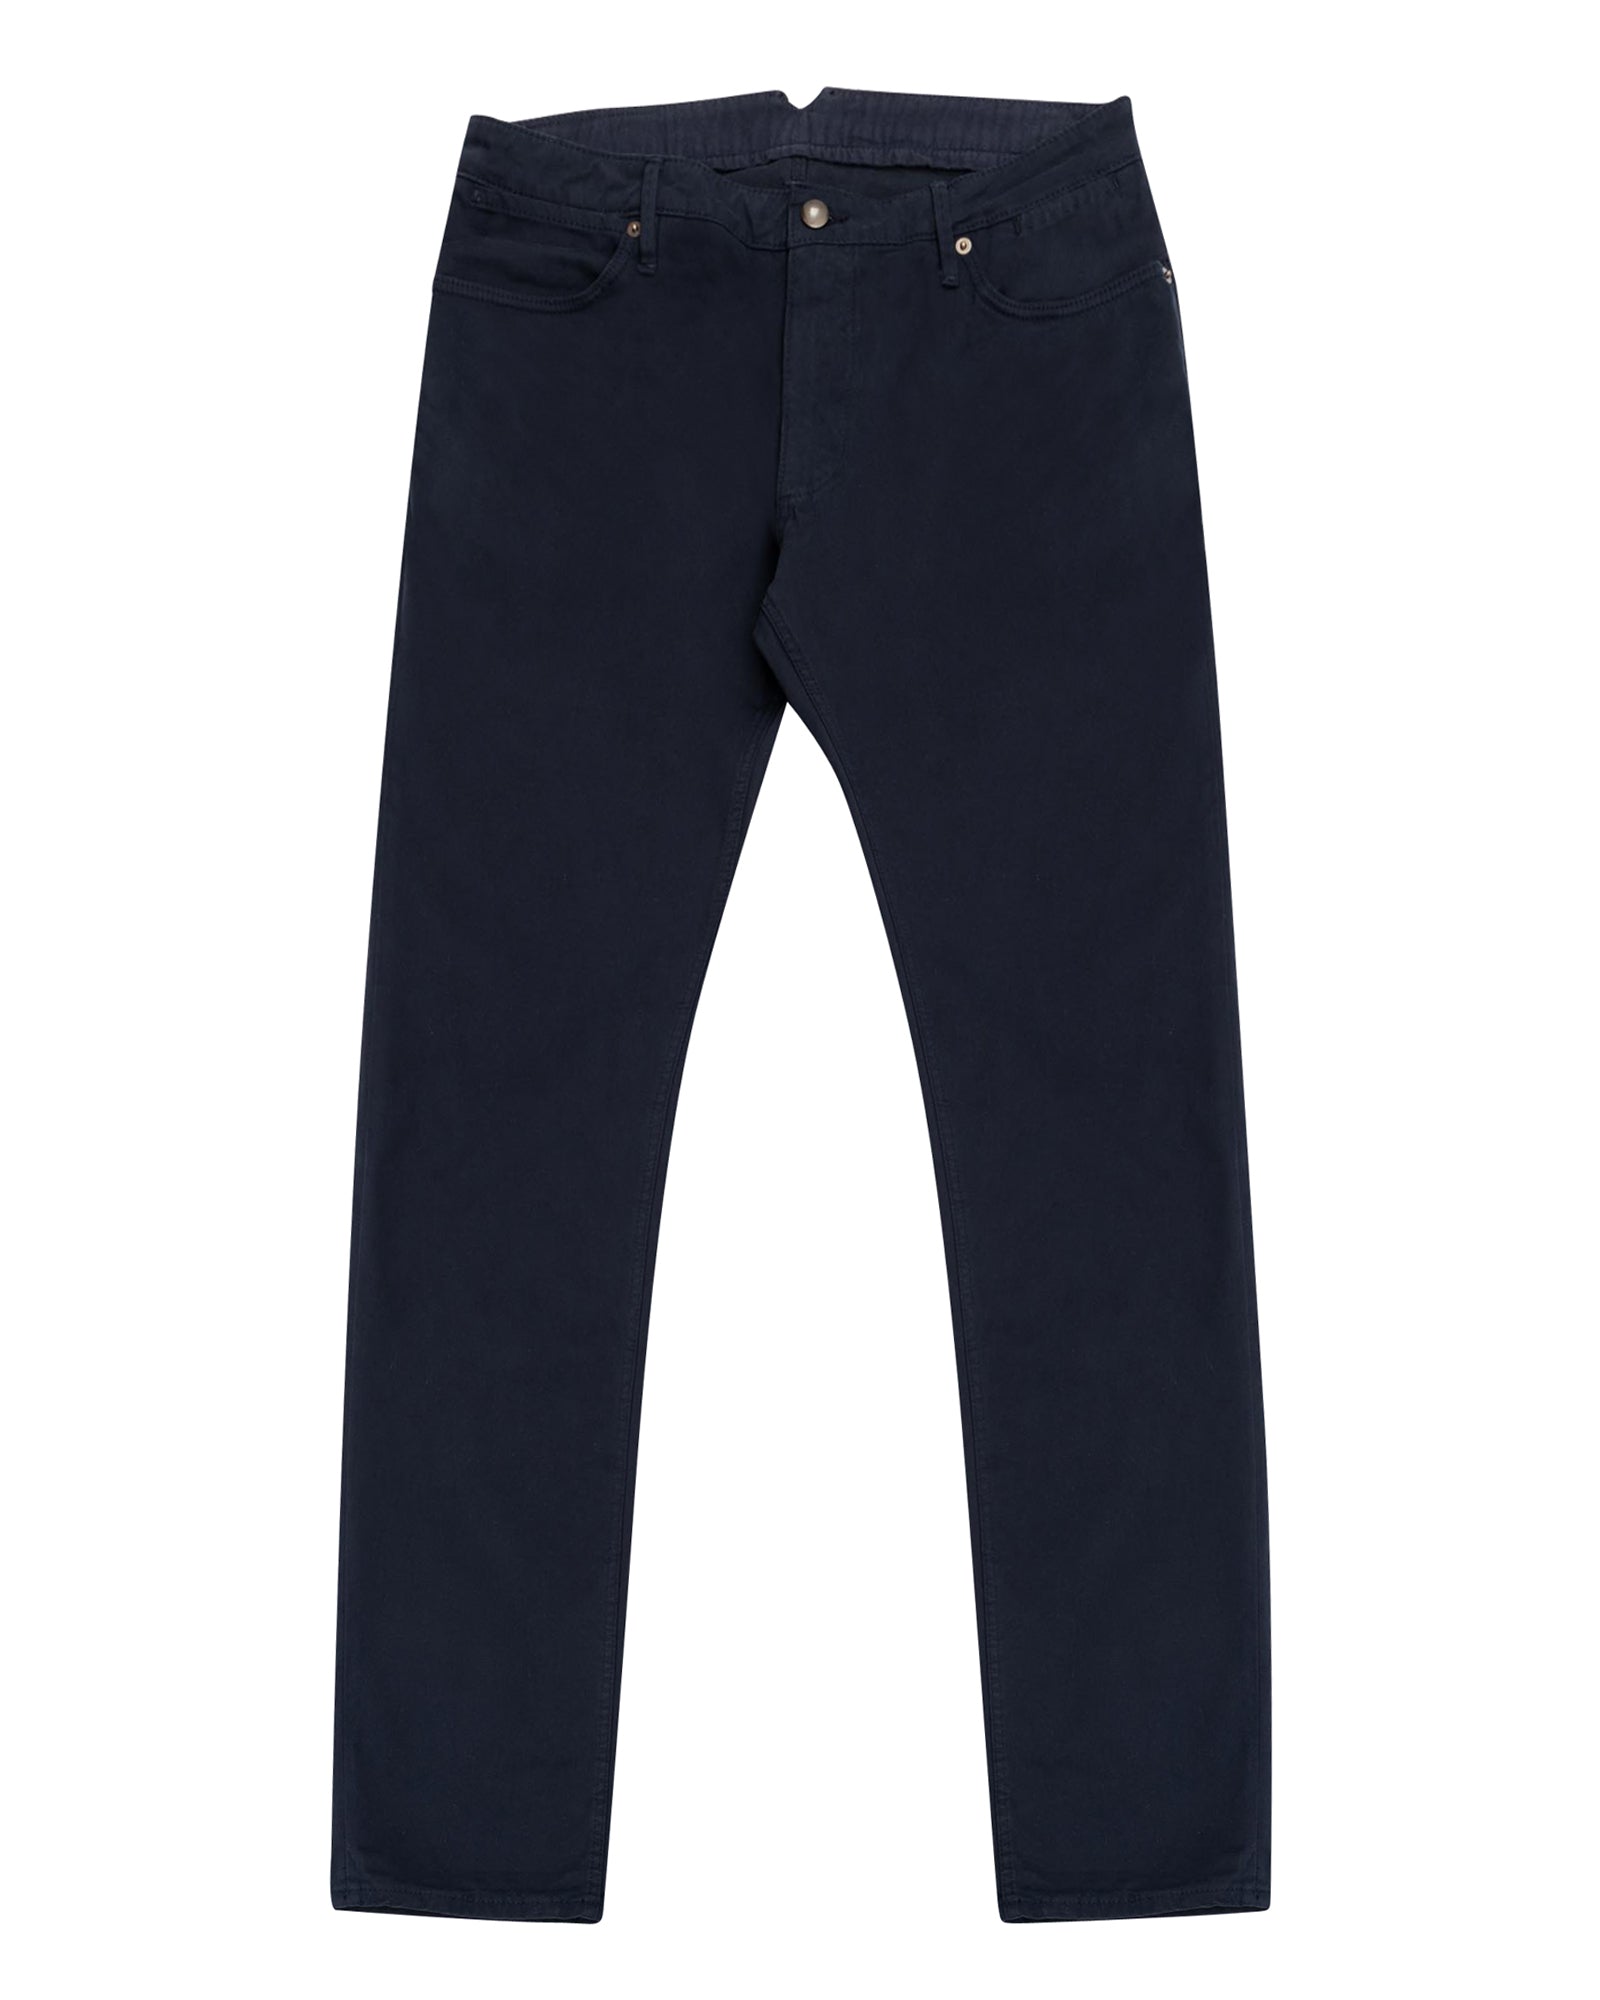 French Navy Broken Twill Five Pocket Pant